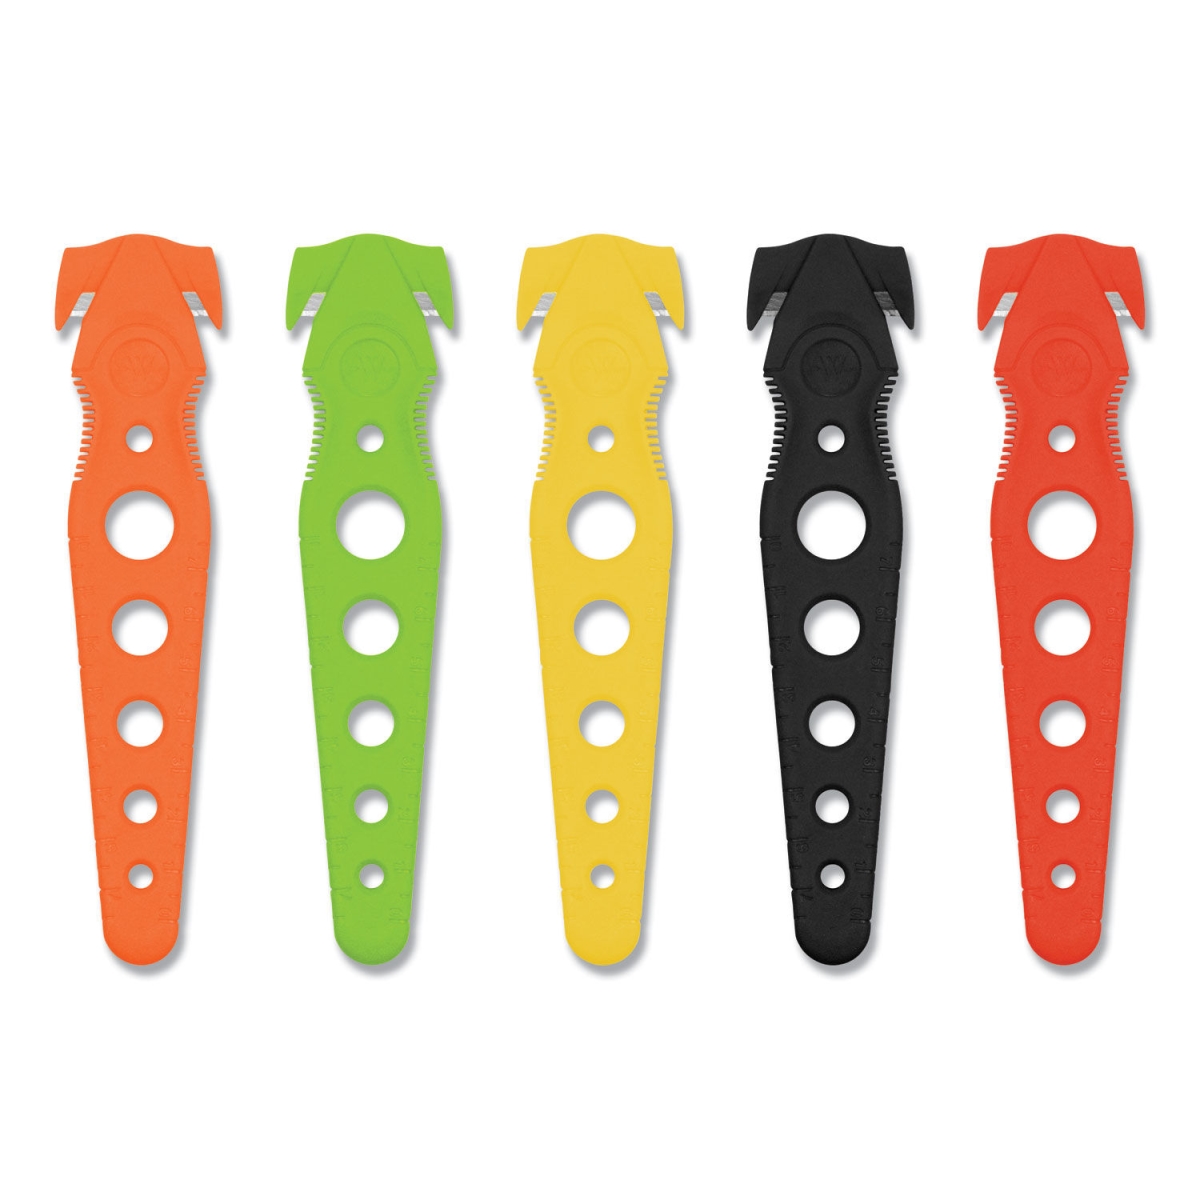 Acm17379 Safety Cutter Knife, Assorted Color - Pack Of 5